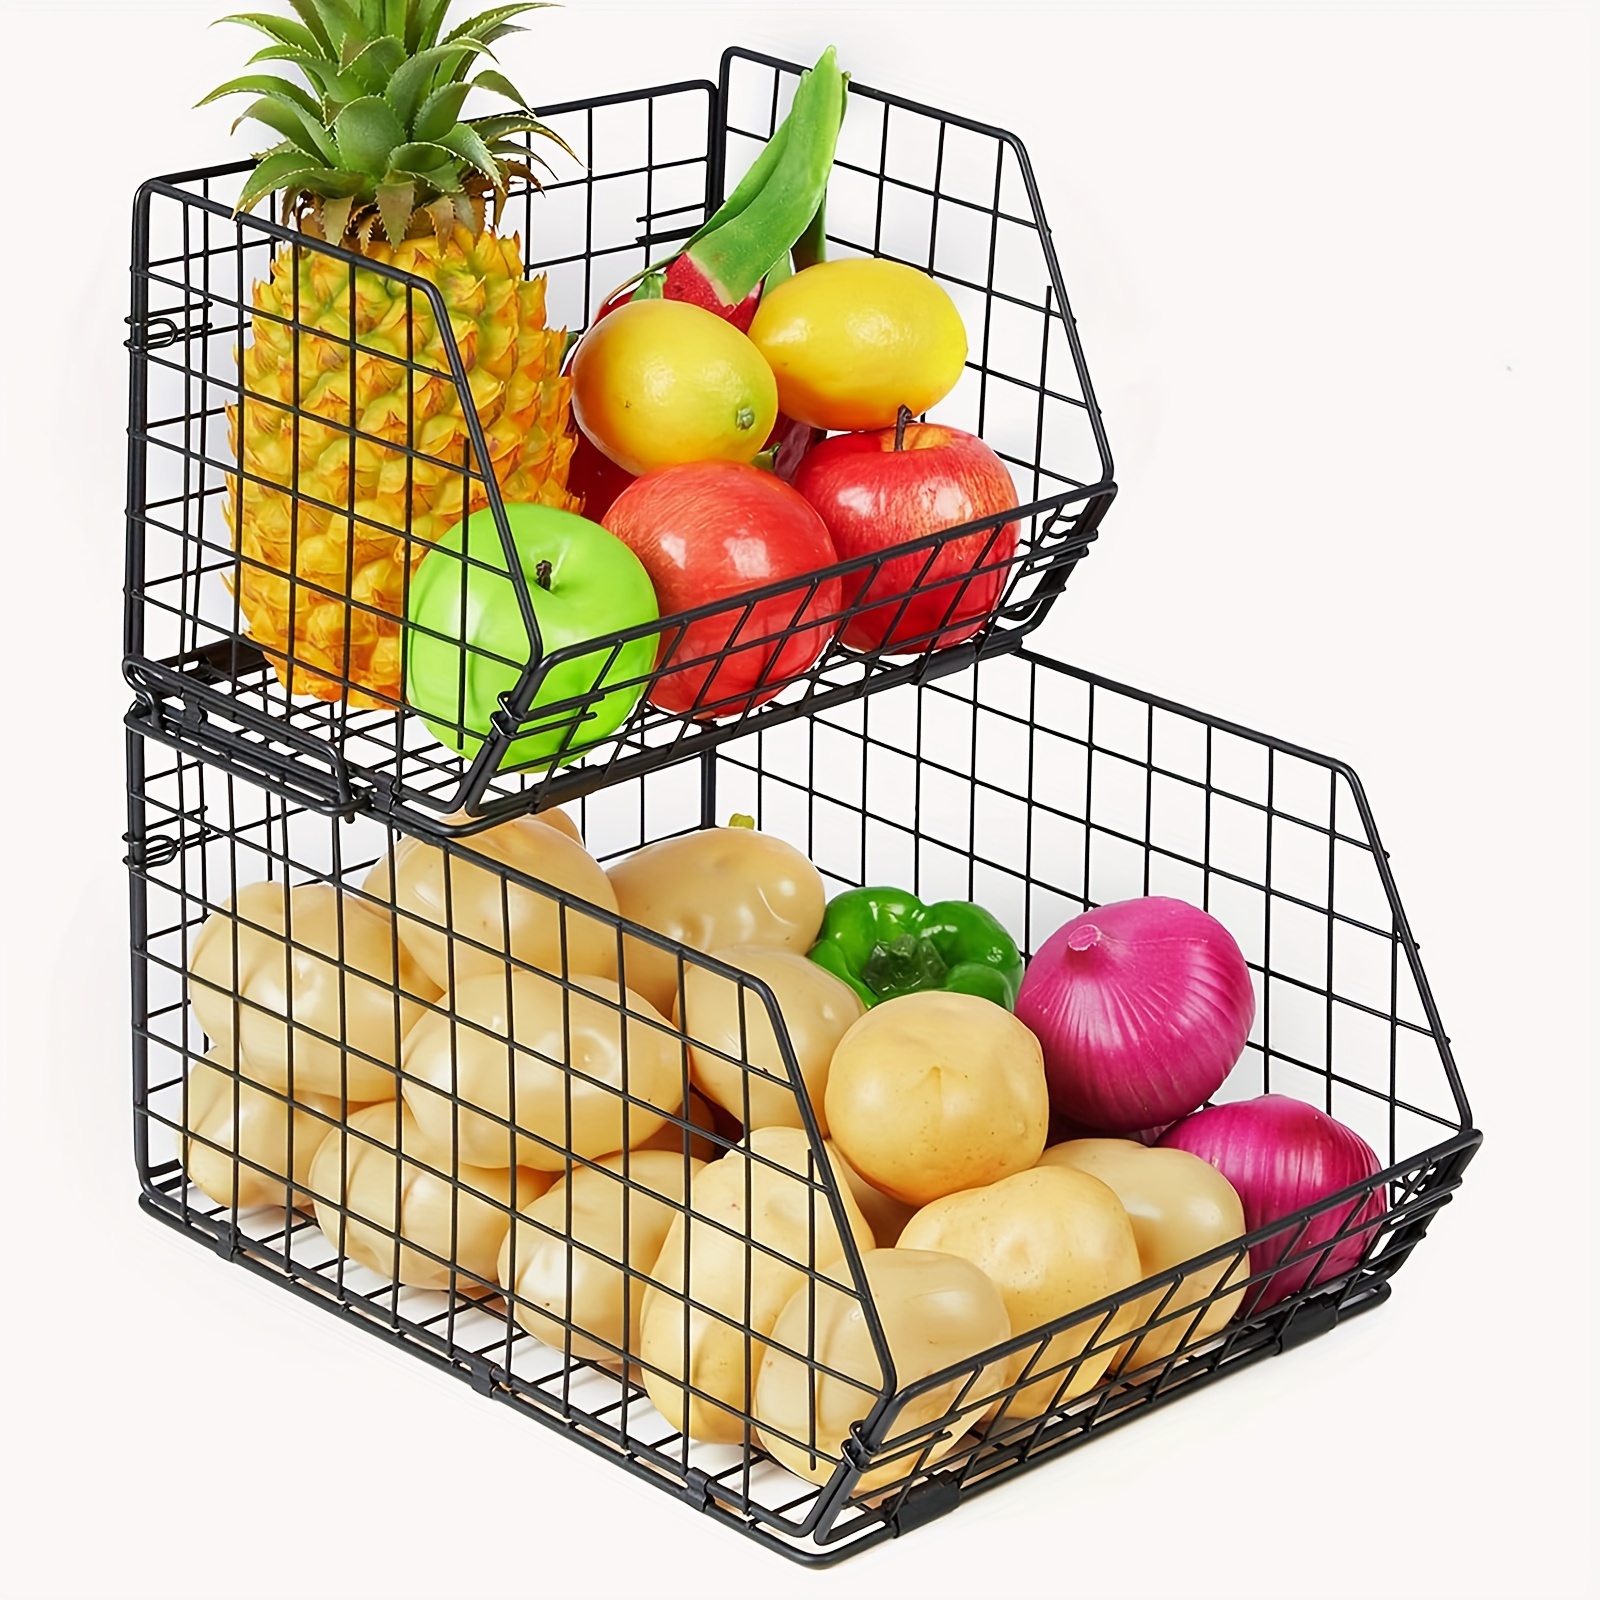 

1pc Stackable Fruit And Vegetable Basket, 2-tier Wall-mounted Storage Baskets For Potato Onion Storage, Metal Kitchen Wire Baskets For Fruit Veggies Produce Snack Canned Foods